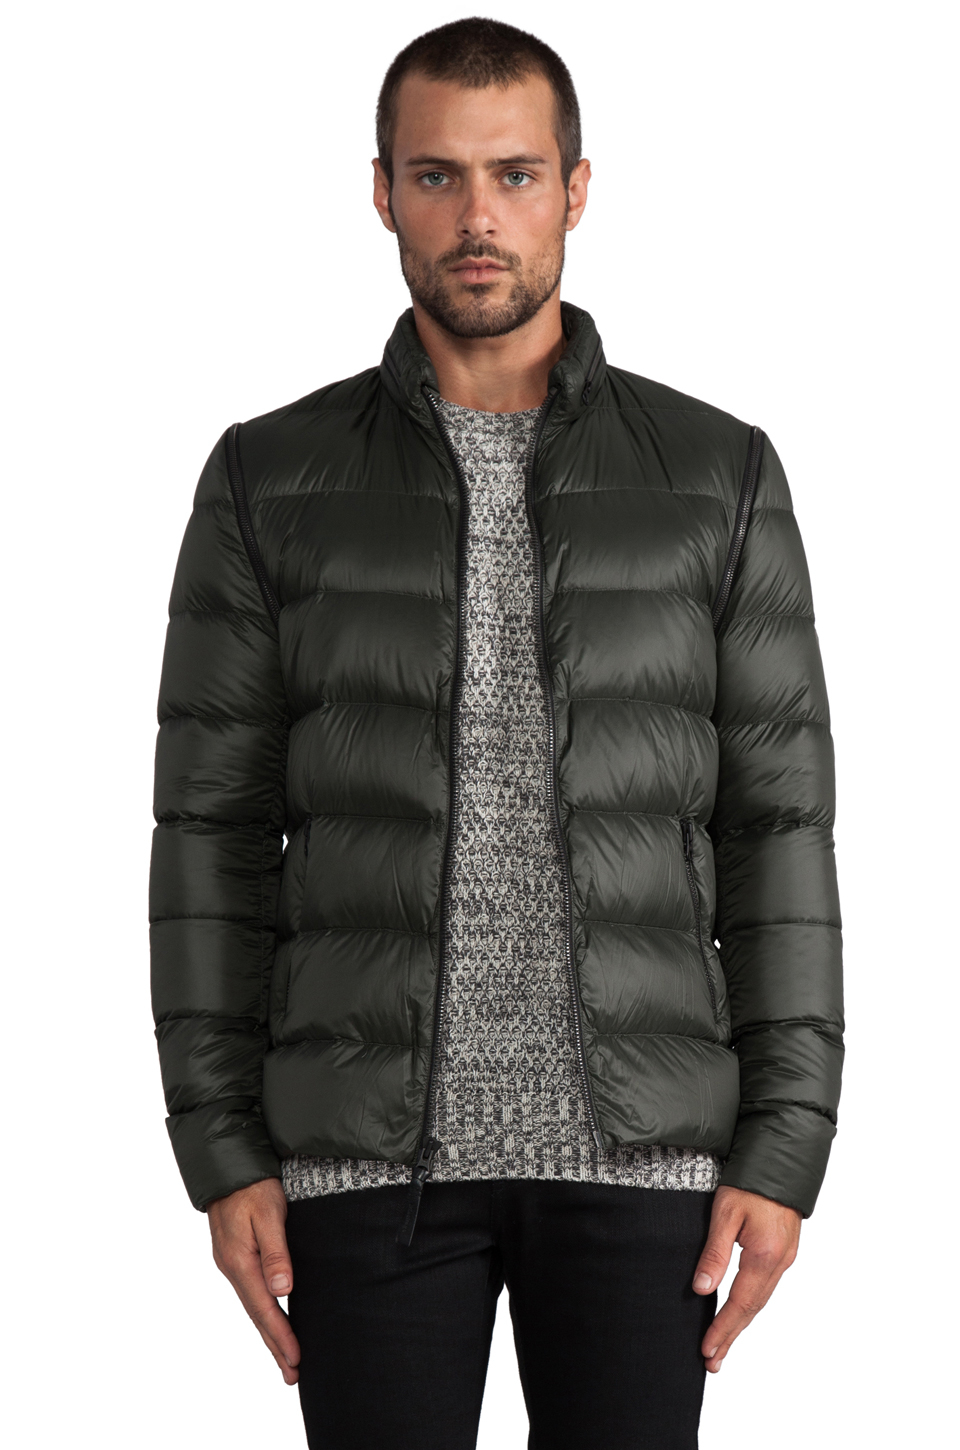 Mackage Lawrence Puffer Jacket in Army in Gray for Men - Lyst